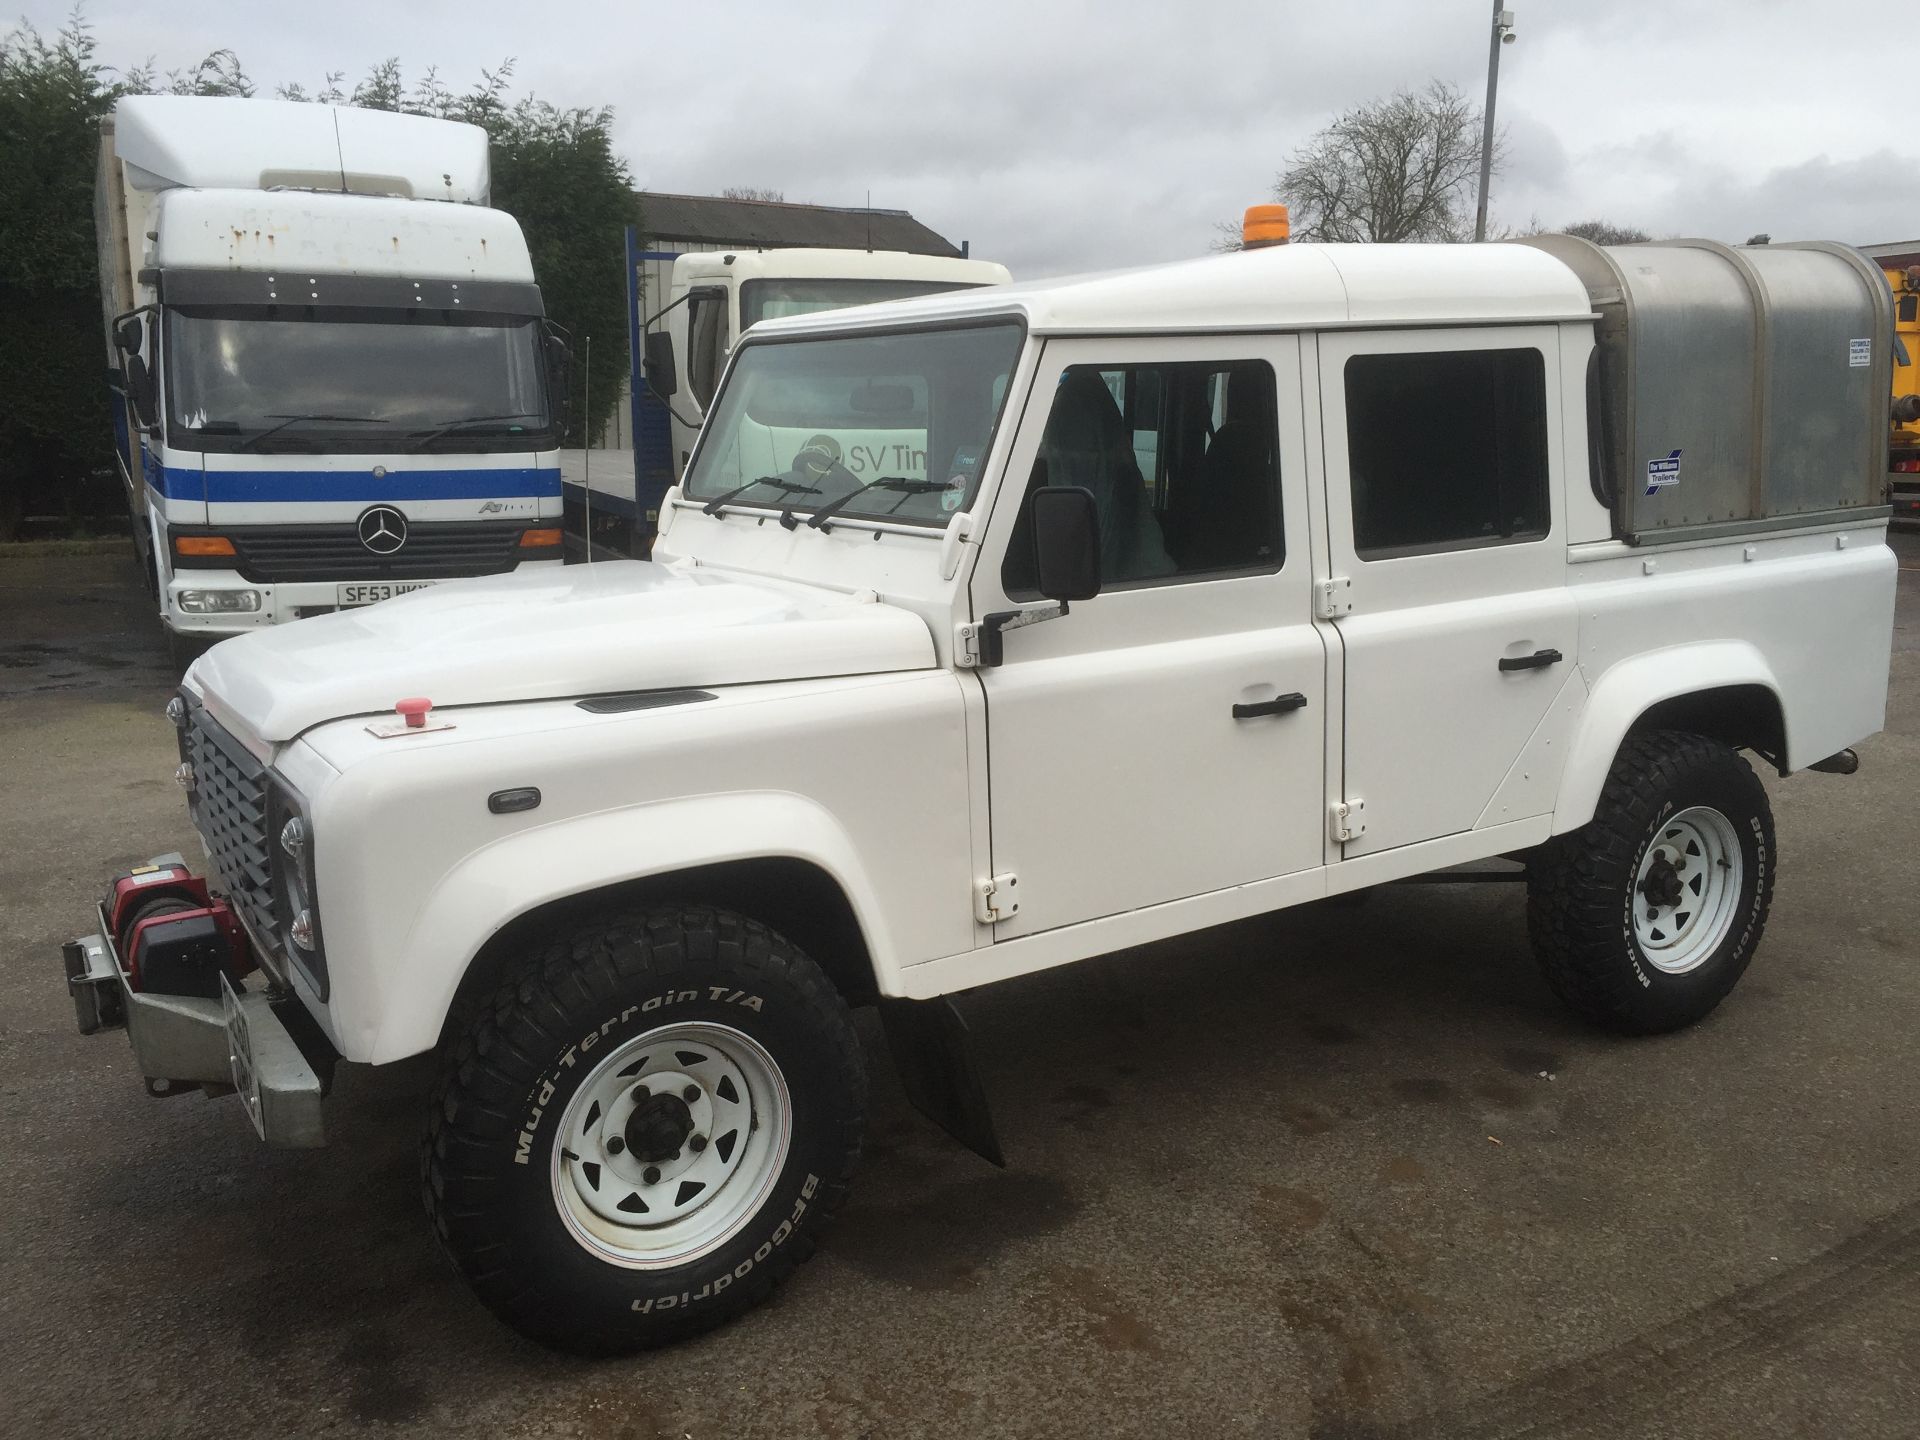 2010 / 60 Land Rover Defender 130 Double Cab - Image 2 of 8